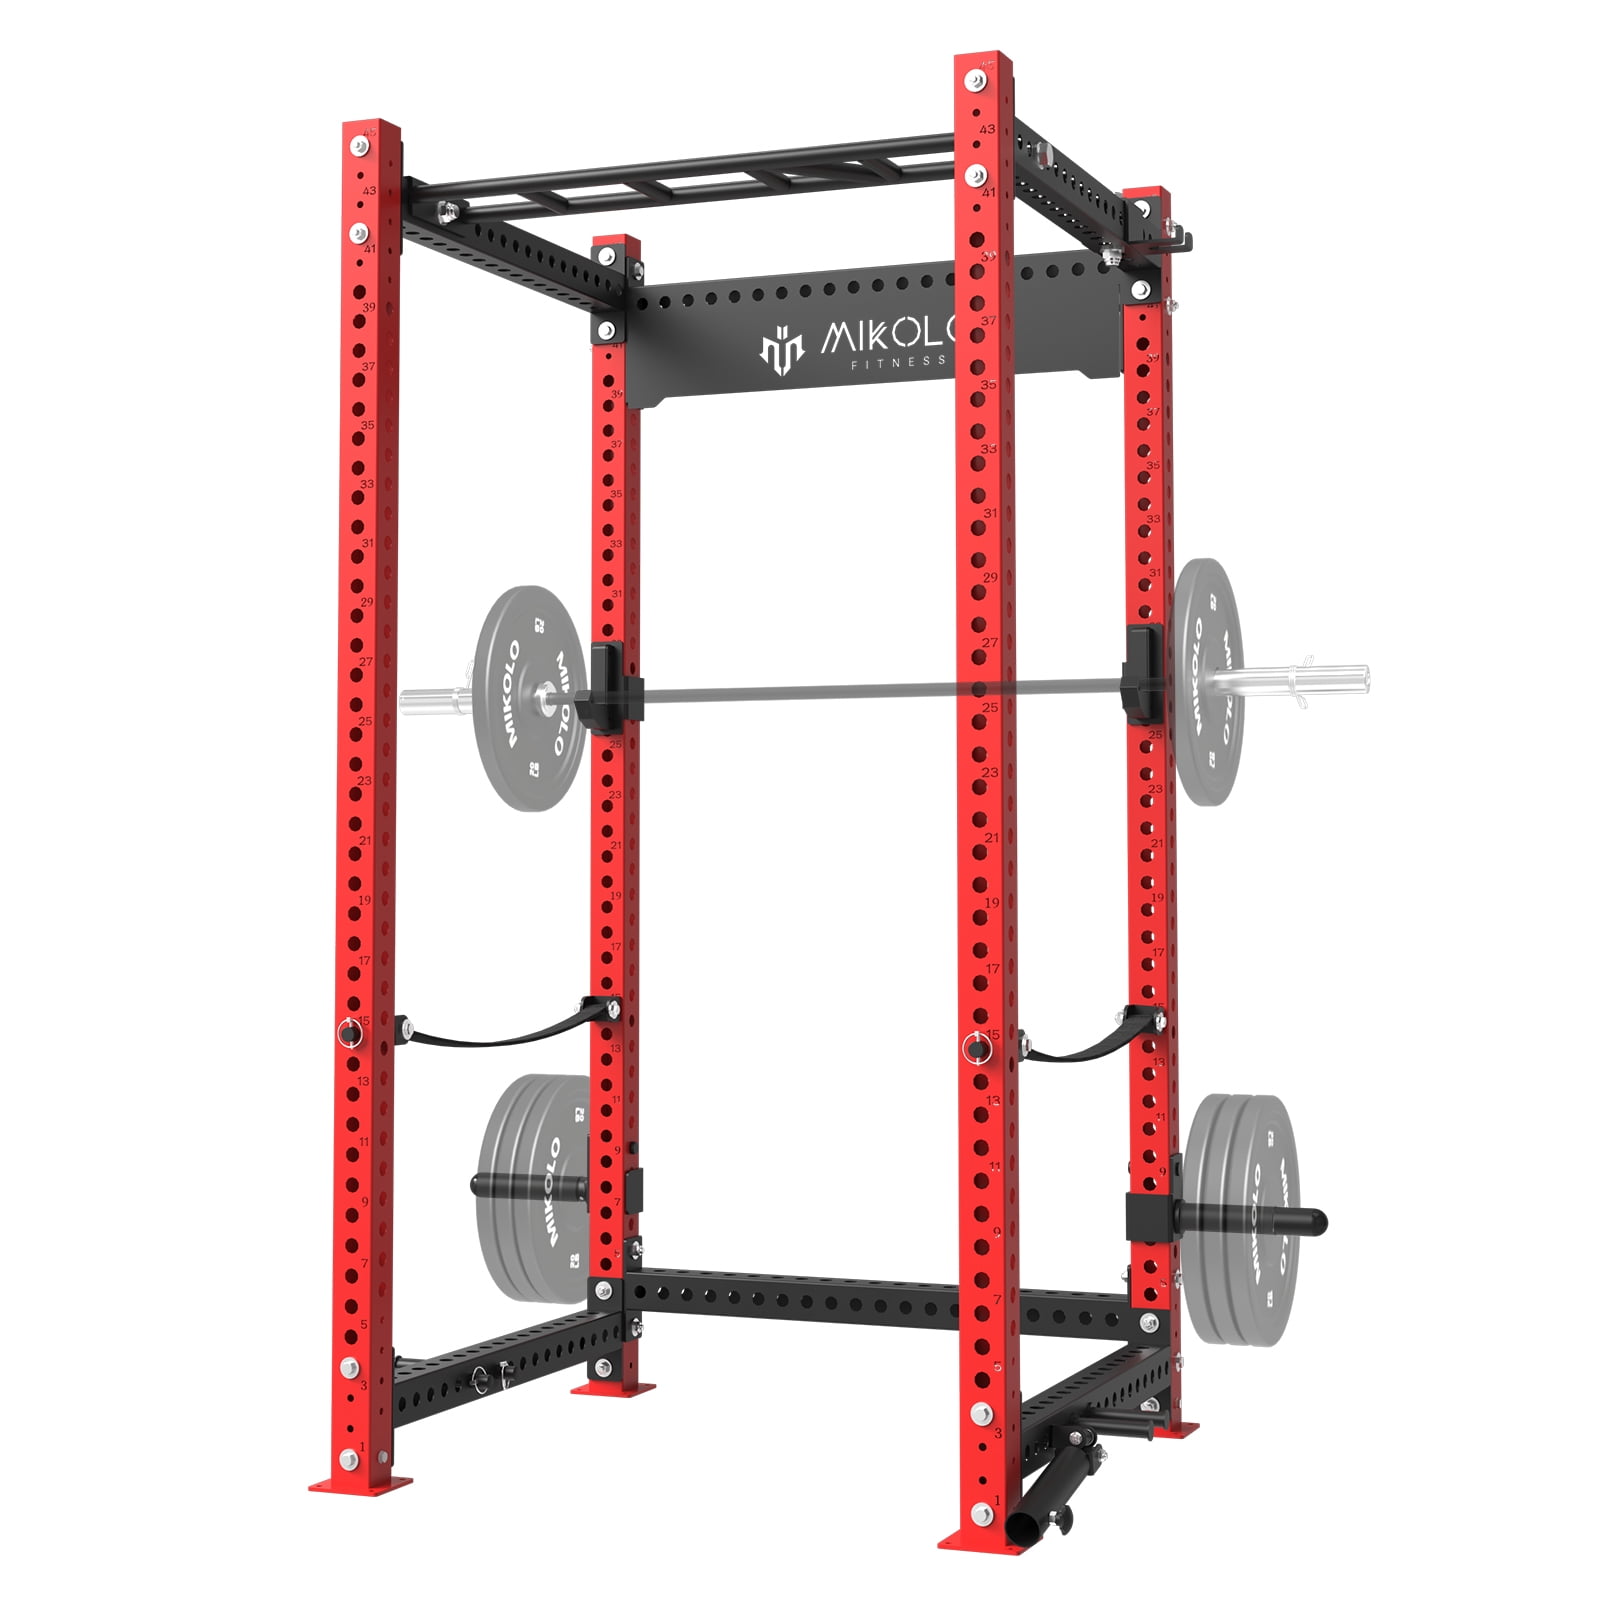 Mikolo Power Rack Cage, Monster Series 3 x 3 Commercial Squat Rack with  2000LB Capacity, and More Attachments for Home Gym(Black) 